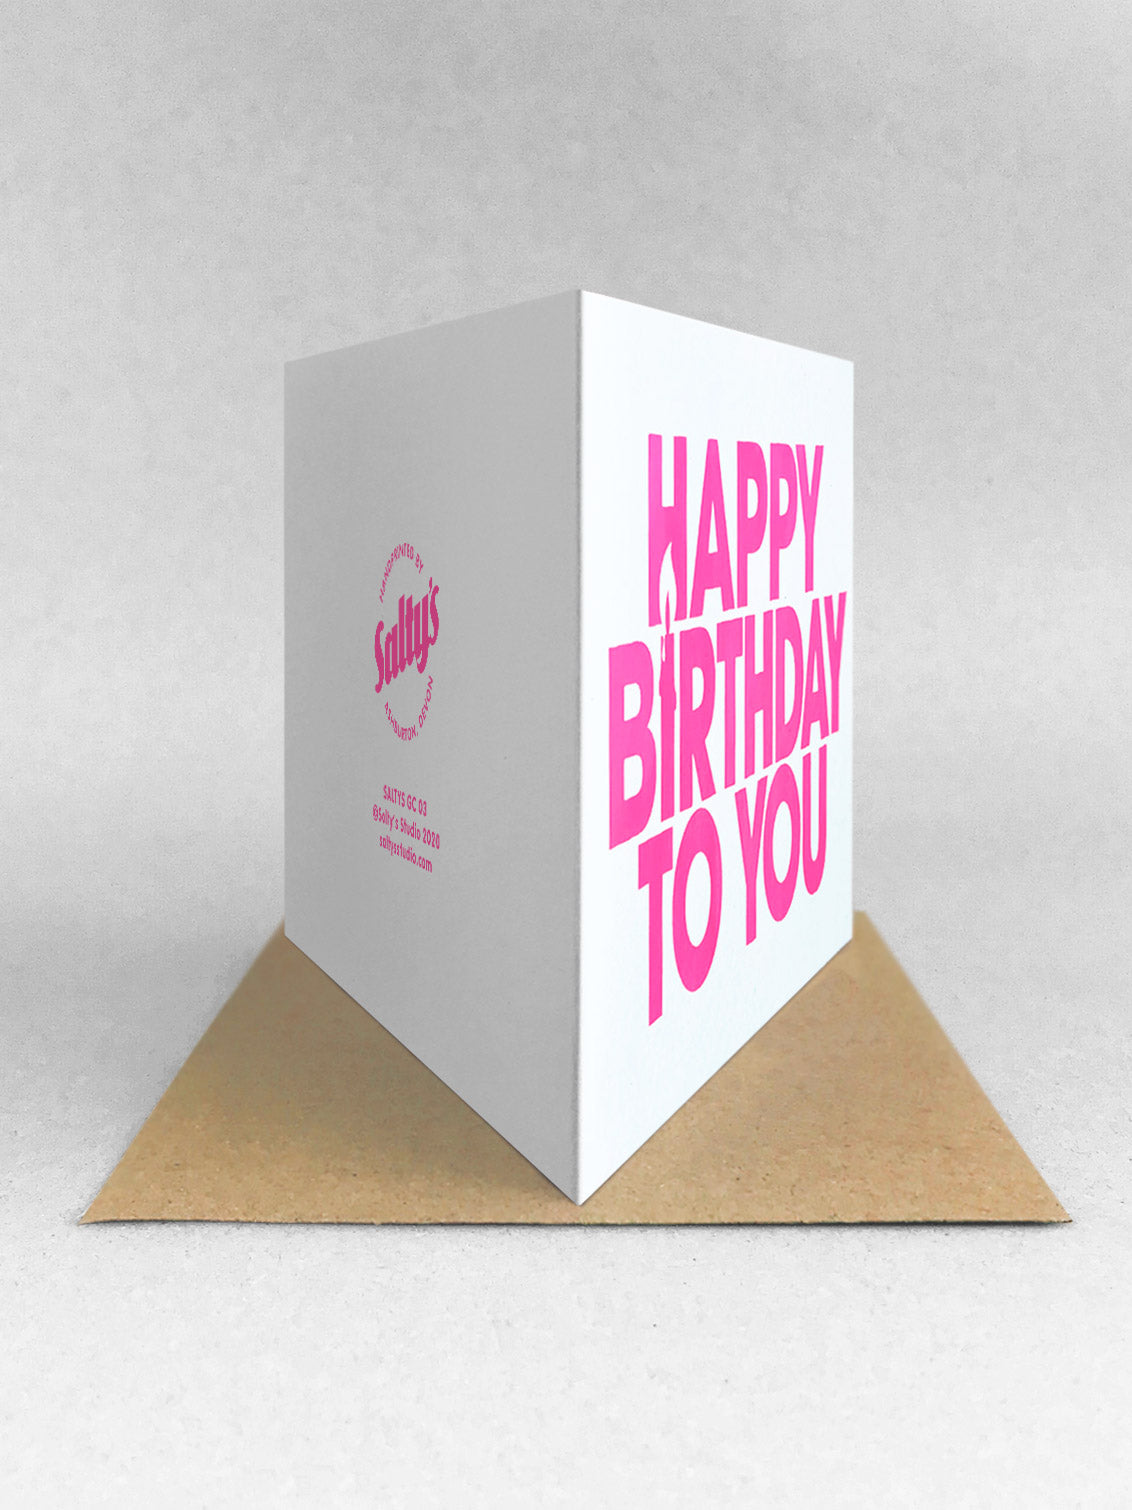 Happy birthday to you card - Neon pink